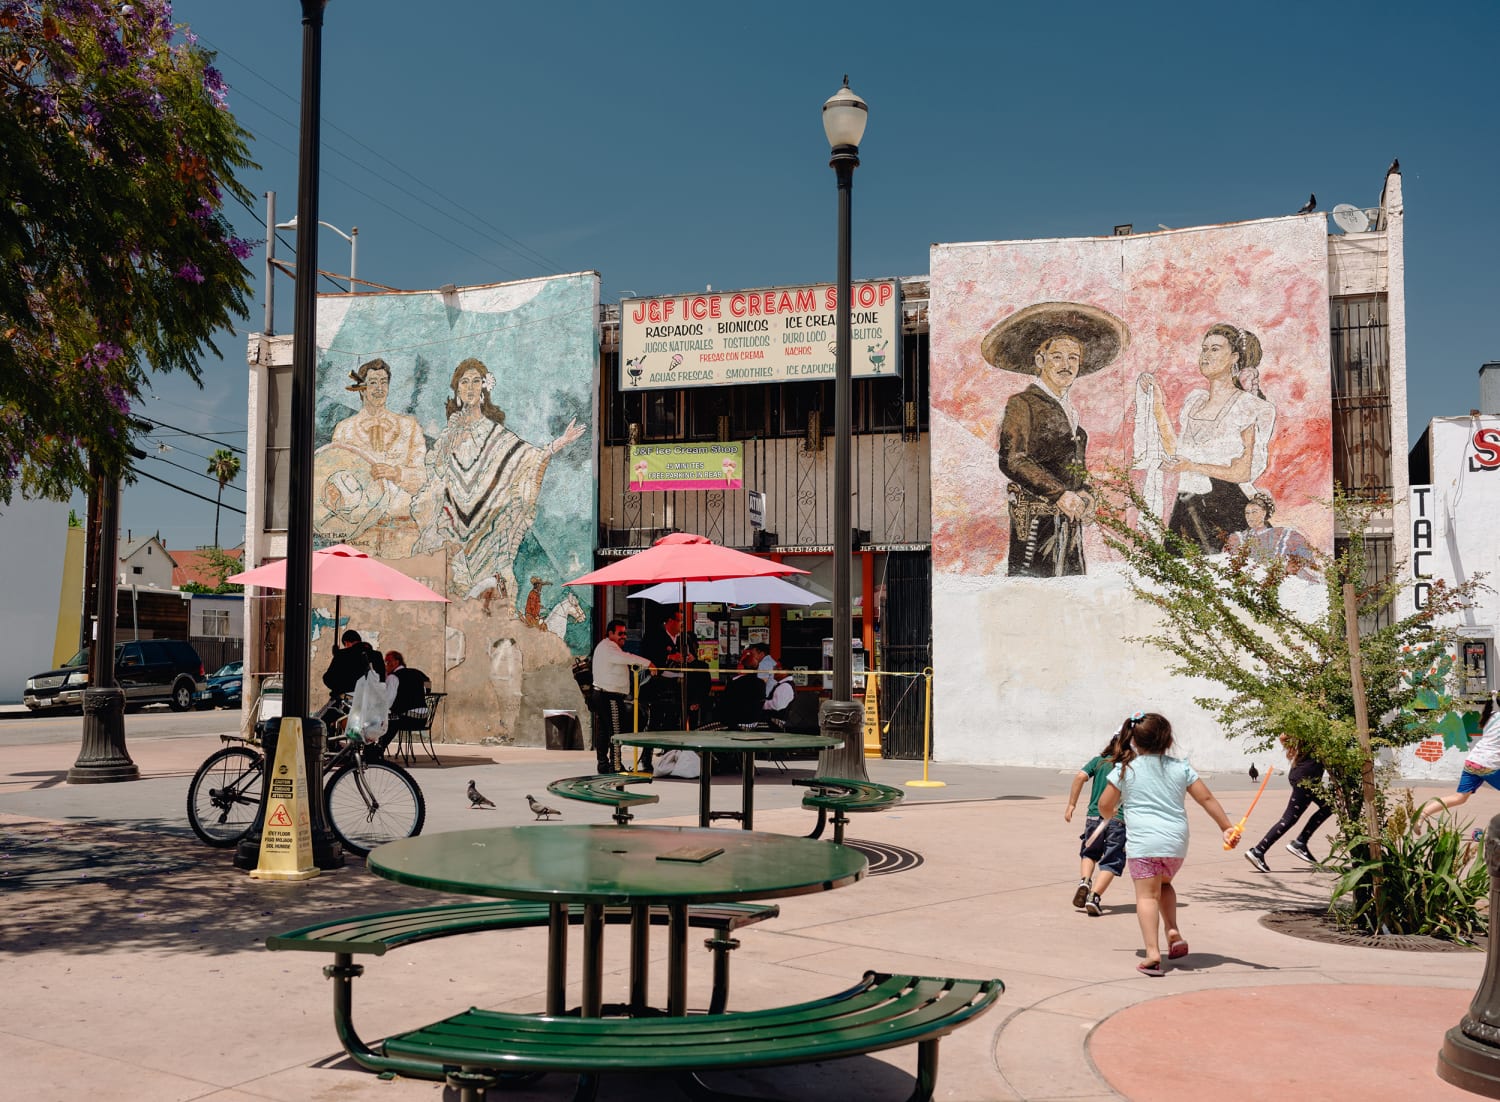 Children play by an ice cream shop surrounded by murals in Boyle Heights.